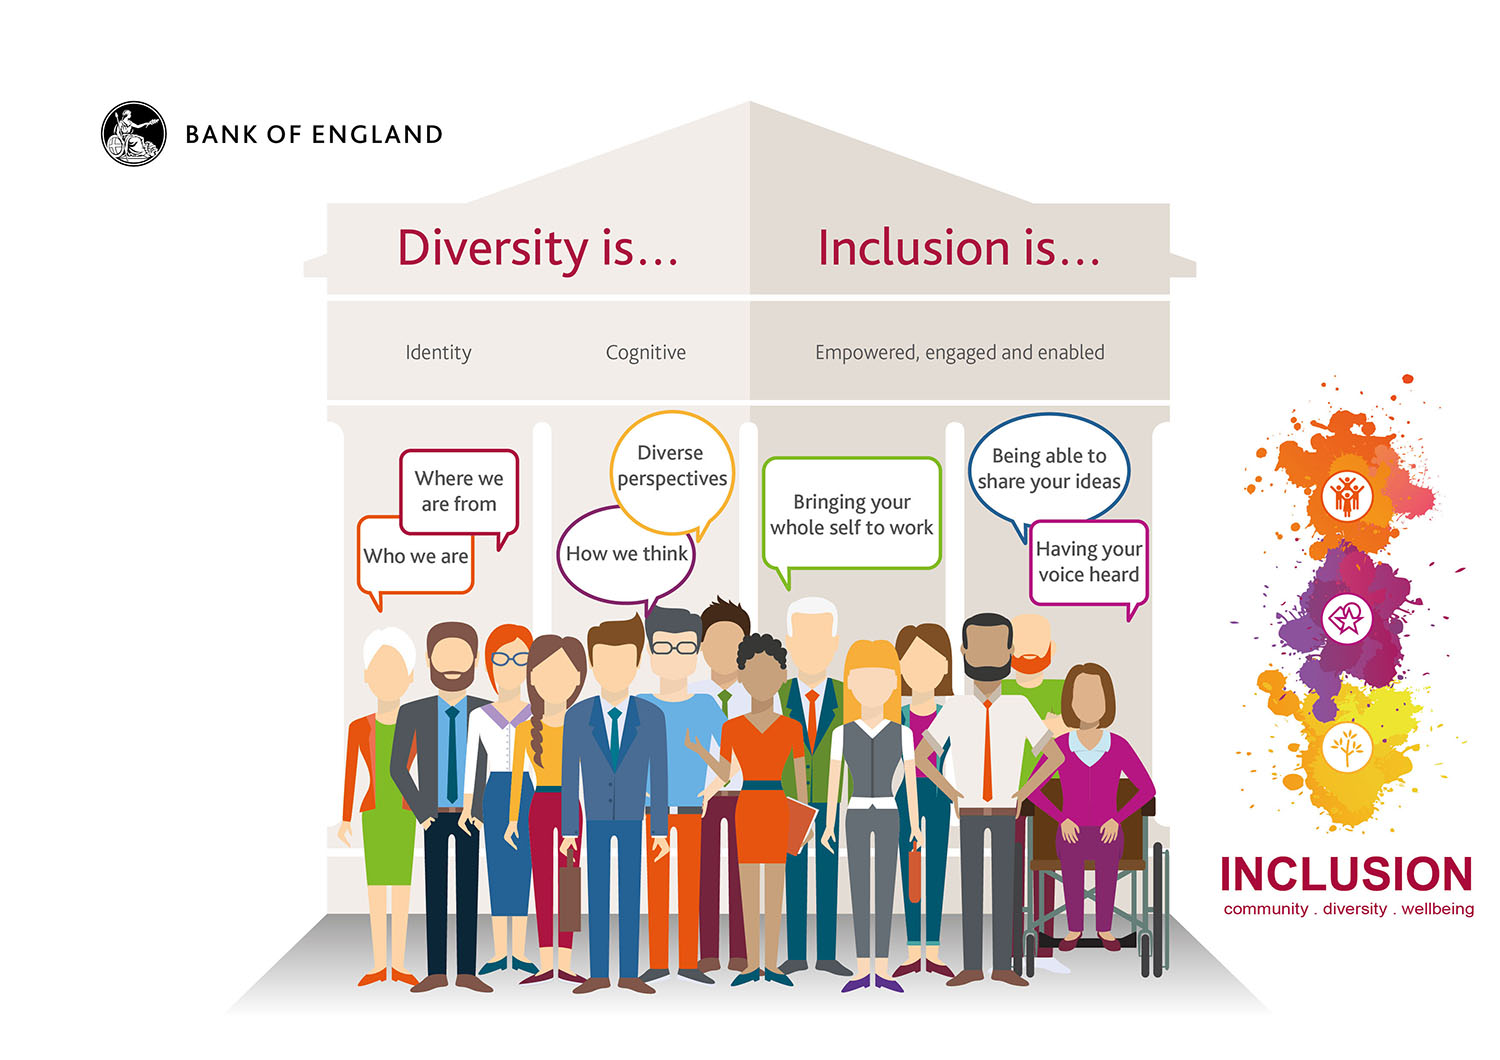 Diversity and inclusion at the Bank of England